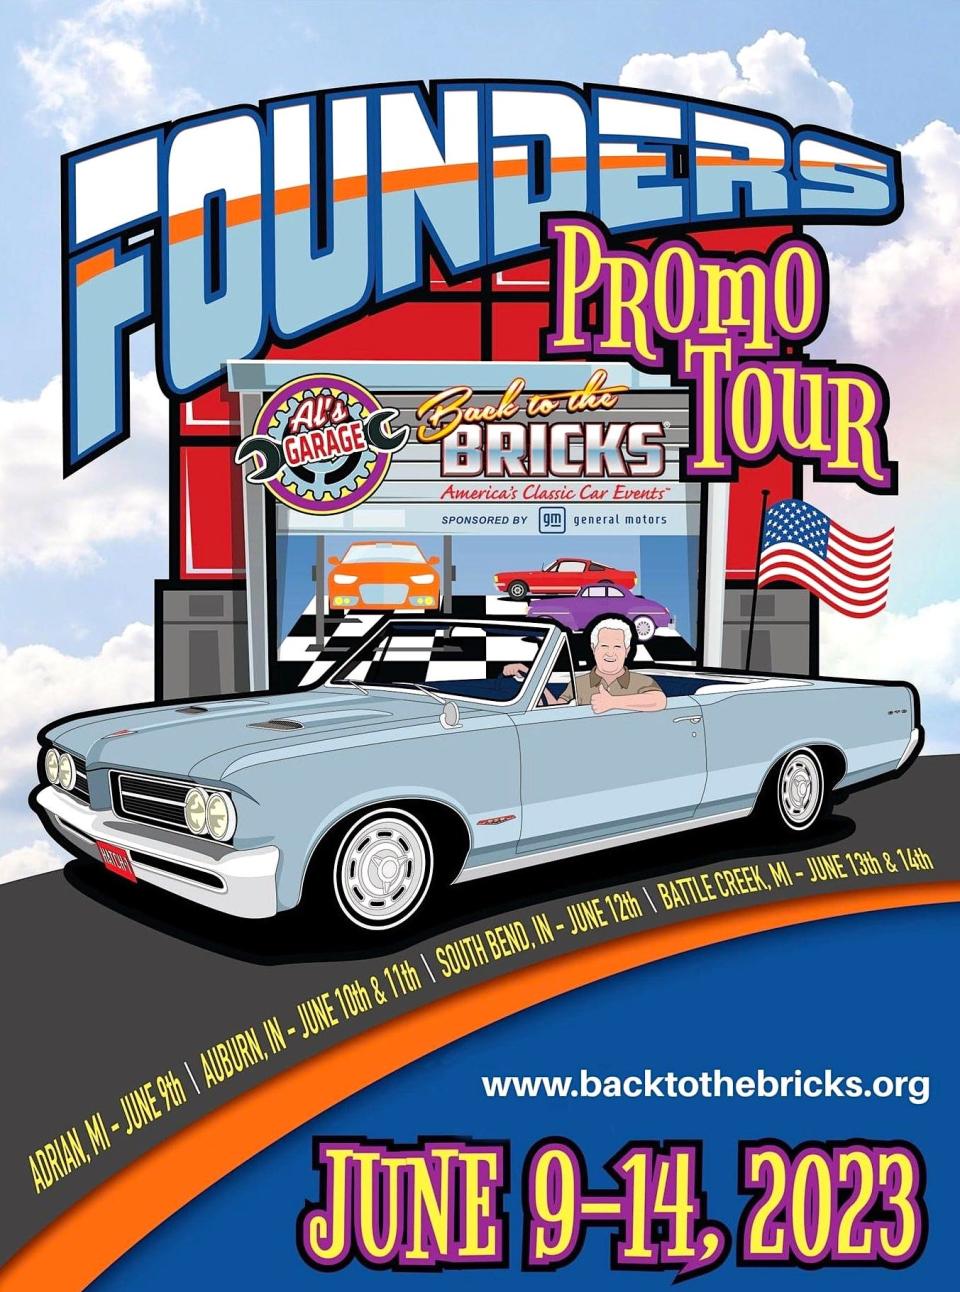 This promotional flyer details information pertinent to the 2023 Back the Bricks Founders Promo Tour, a car show event that generates a following of 500,000 car enthusiasts each year. The 2023 promo tour is June 9-14 and it begins in Adrian, June 9. Other car show locations are in Battle Creek and in Indiana.